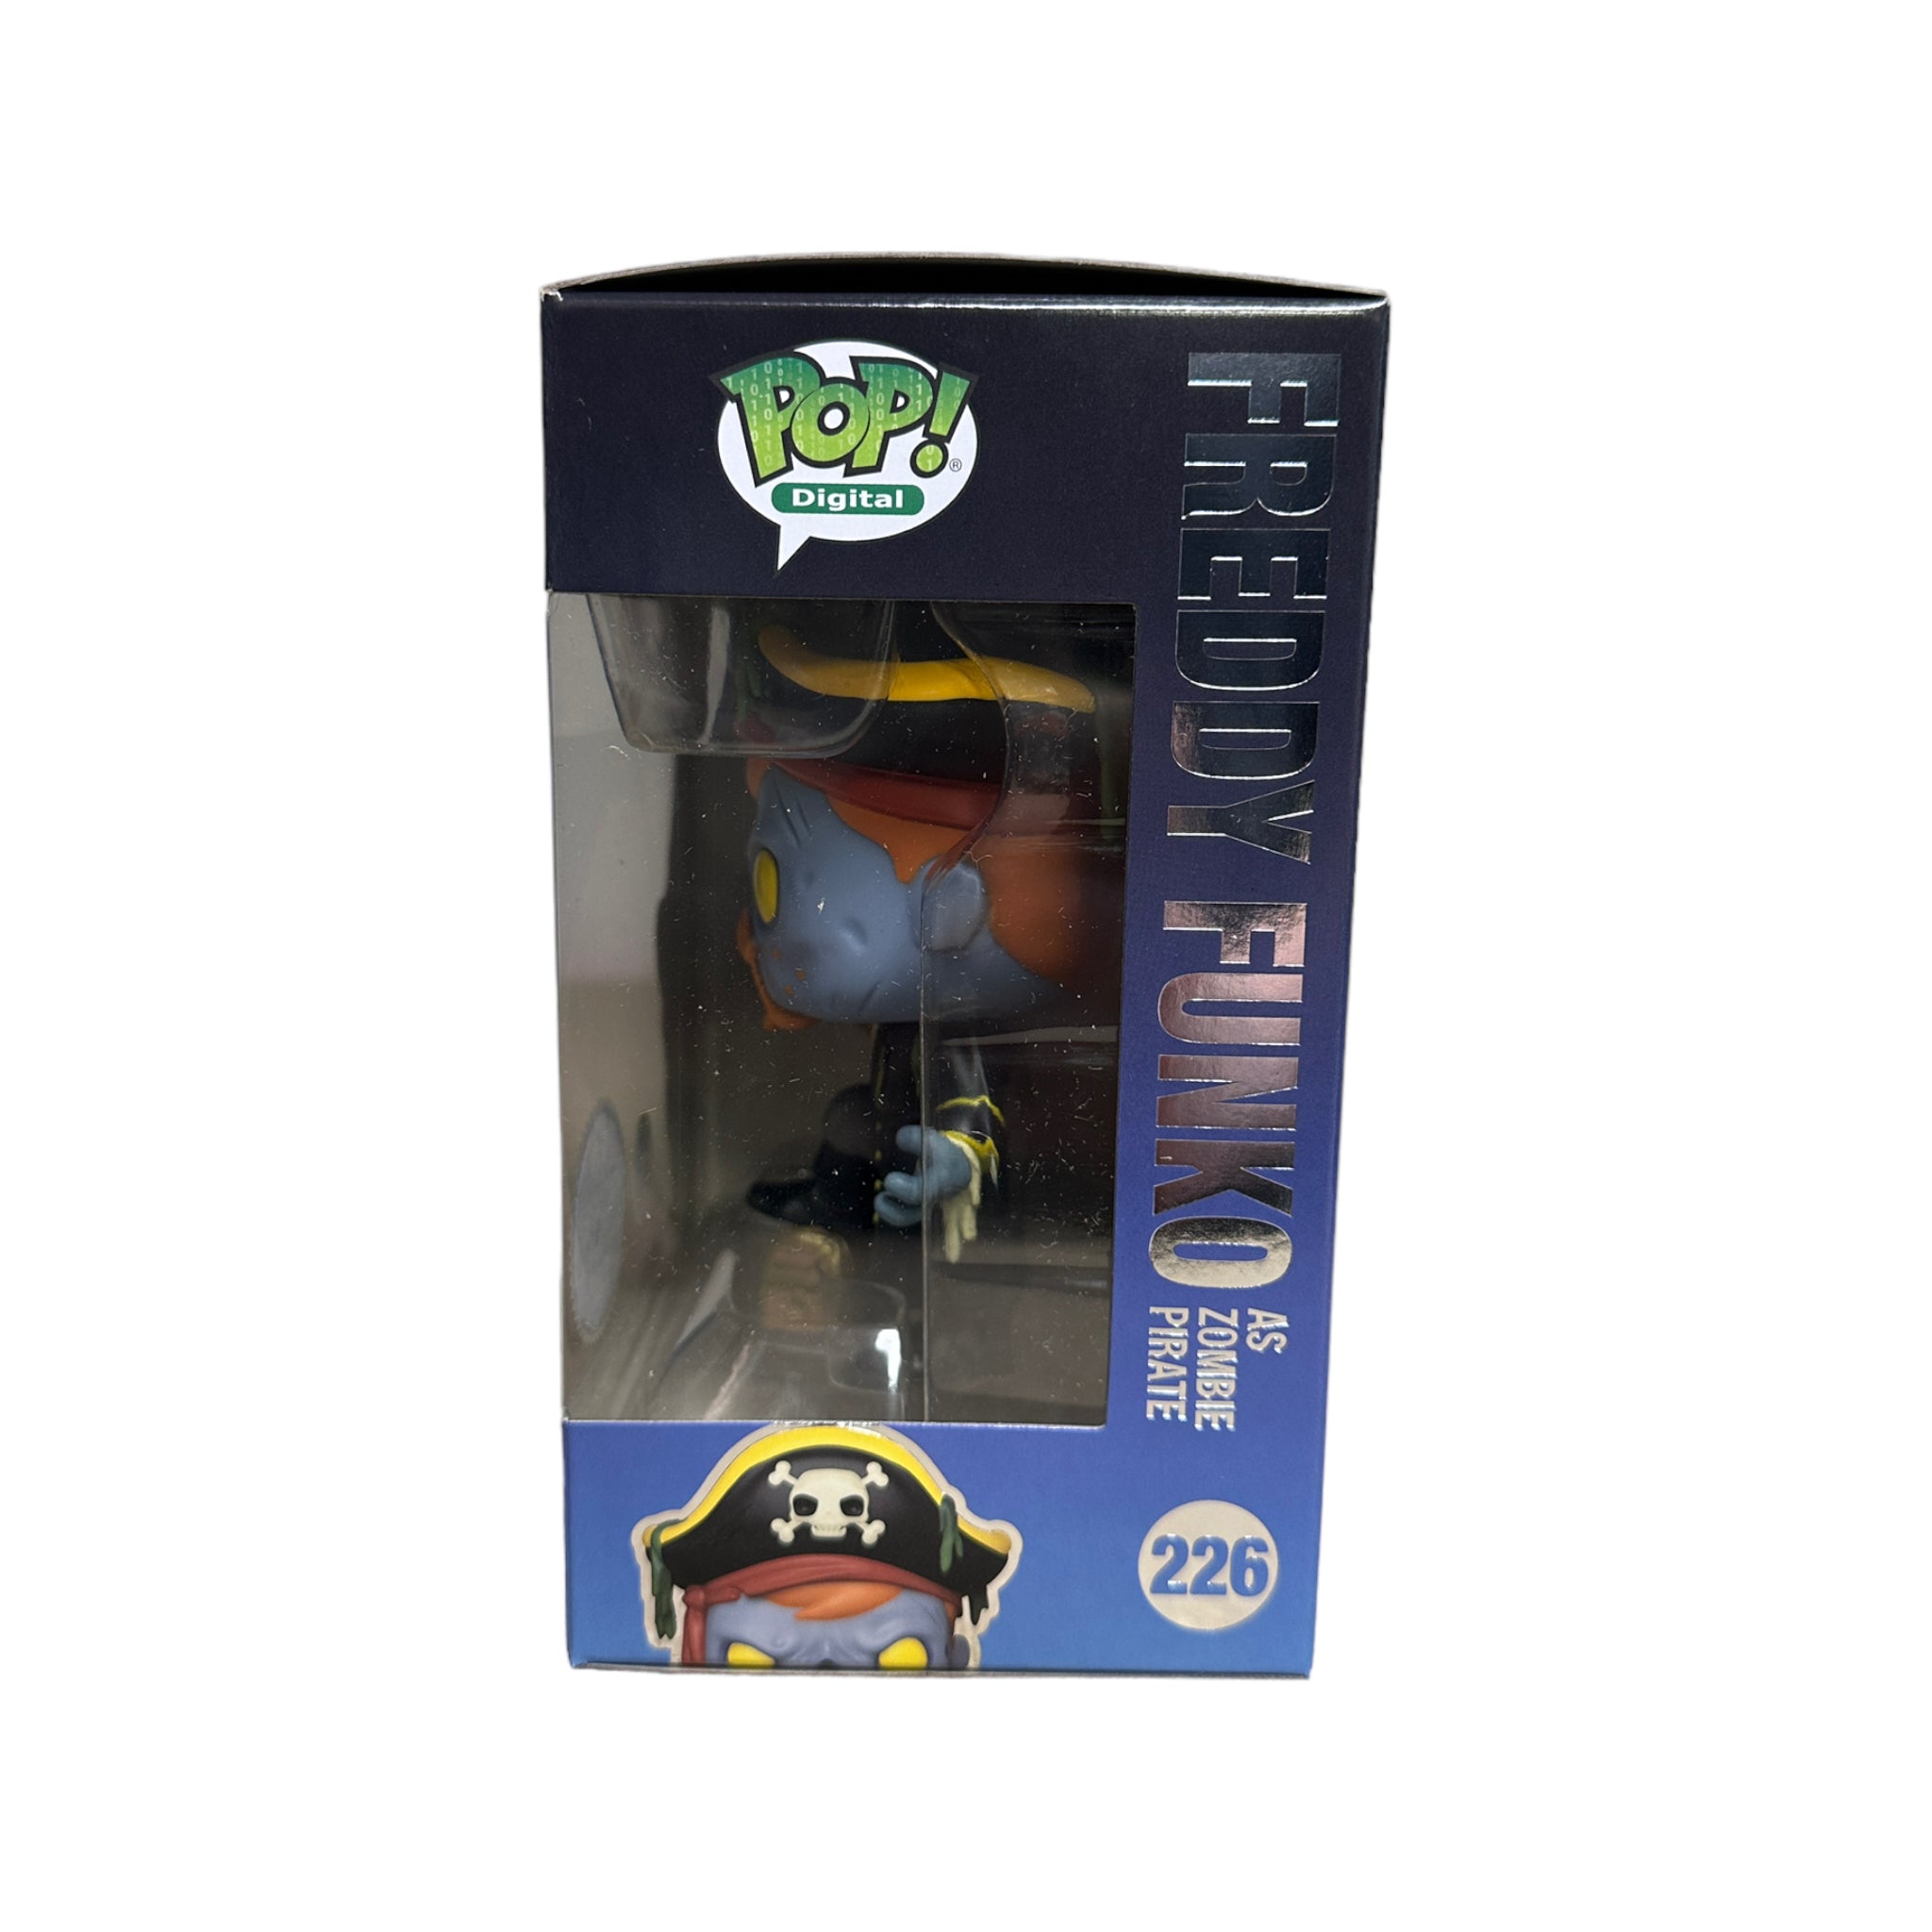 Freddy Funko as Zombie Pirate #226 (Glows in the Dark) Funko Pop! - Funkoween Series 1 - NFT Release Exclusive LE1900 Pcs - Condition 8/10